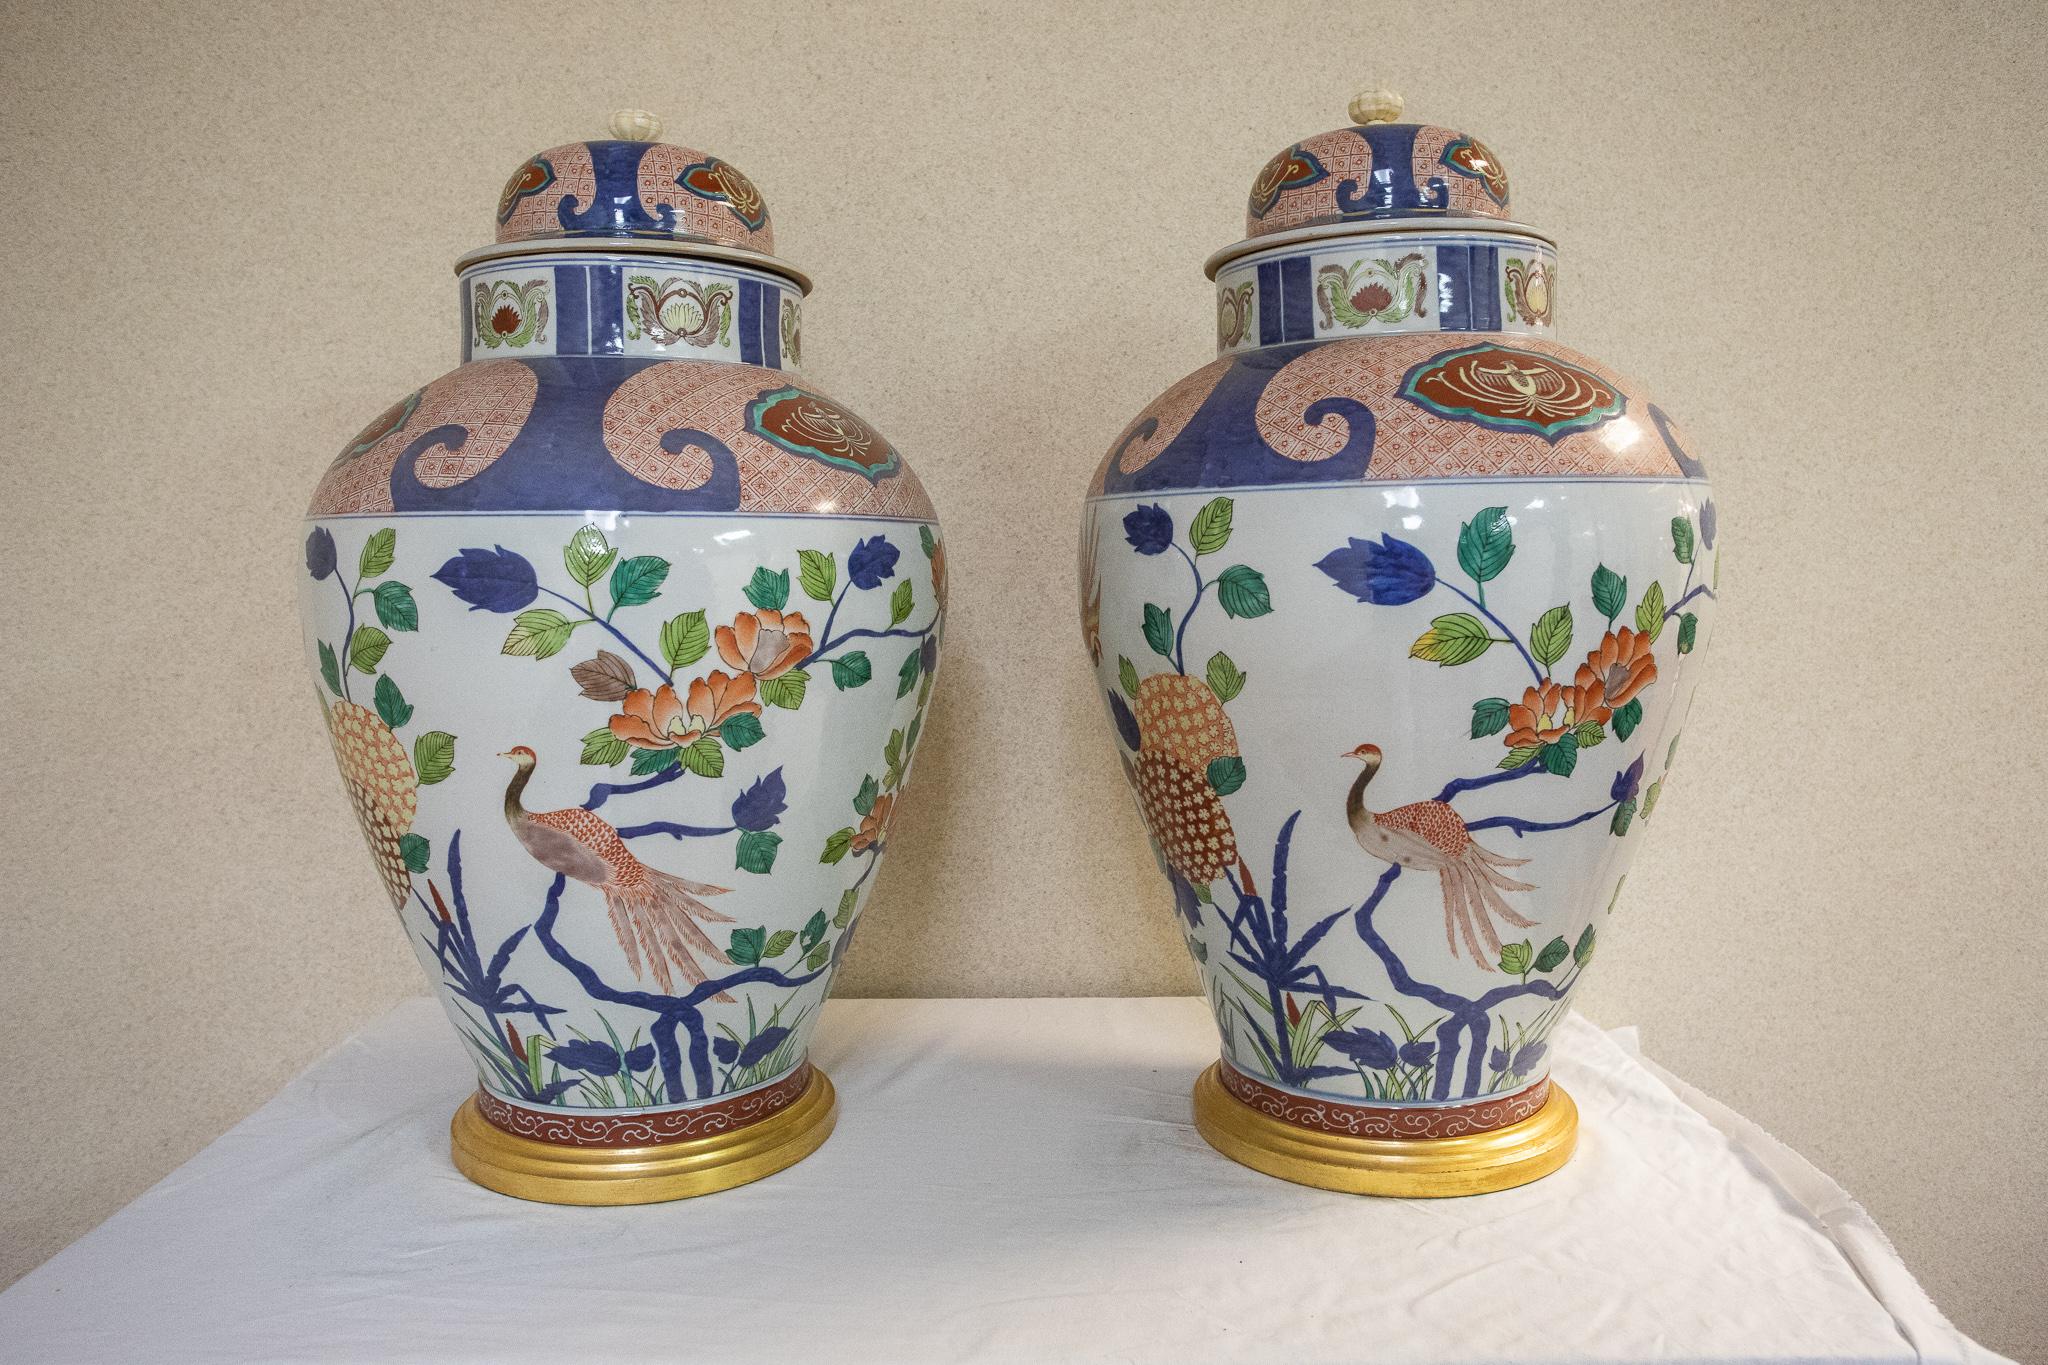 Pair of large 19 century Japanese Imari floral motif covered vases in the shape of ginger jars.
Mounted on giltwood bases.